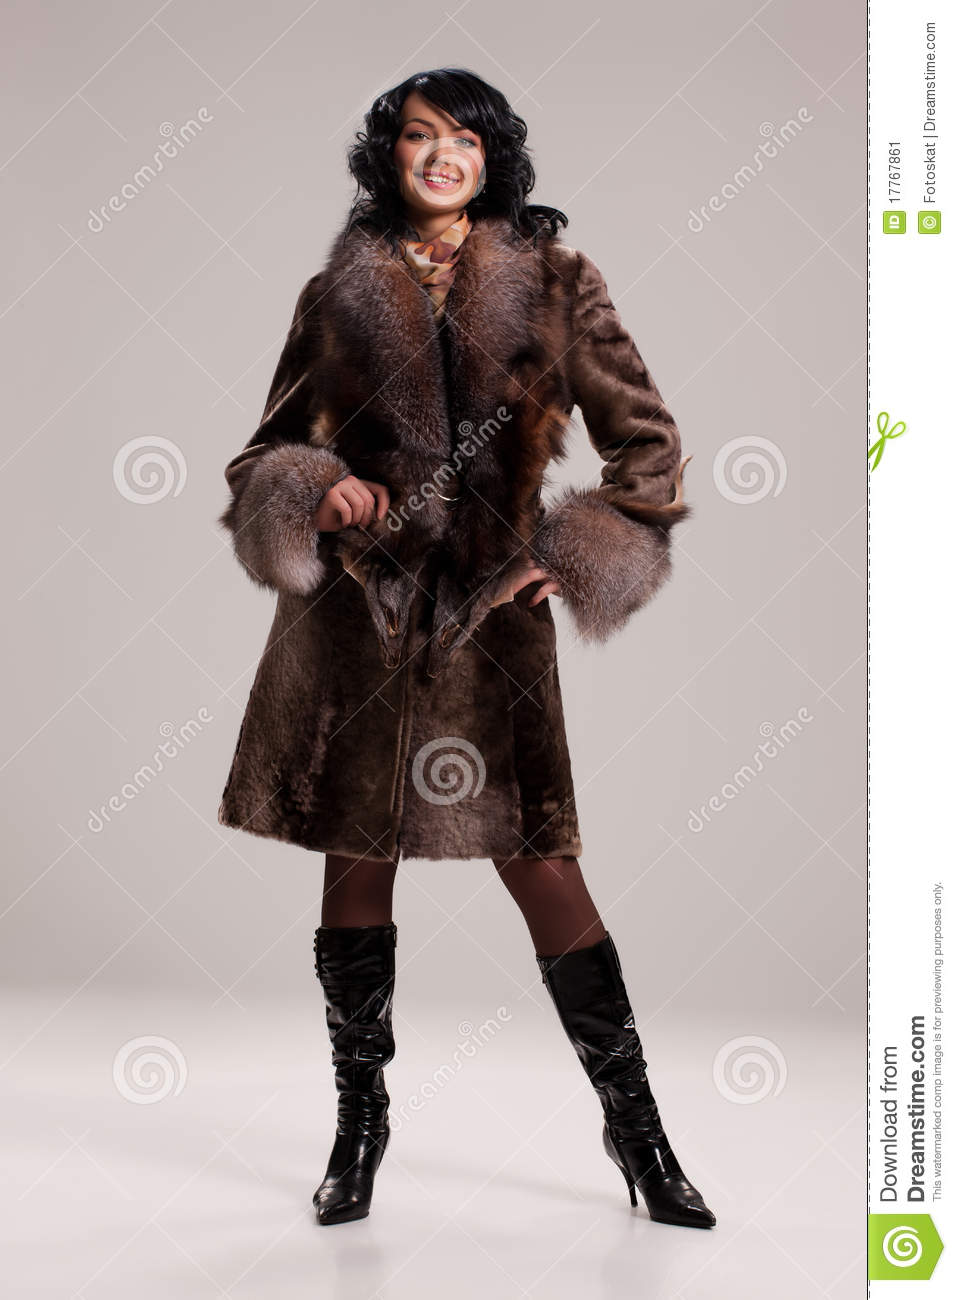 Young Attractive Woman In A Fur Coat On Isolated Background